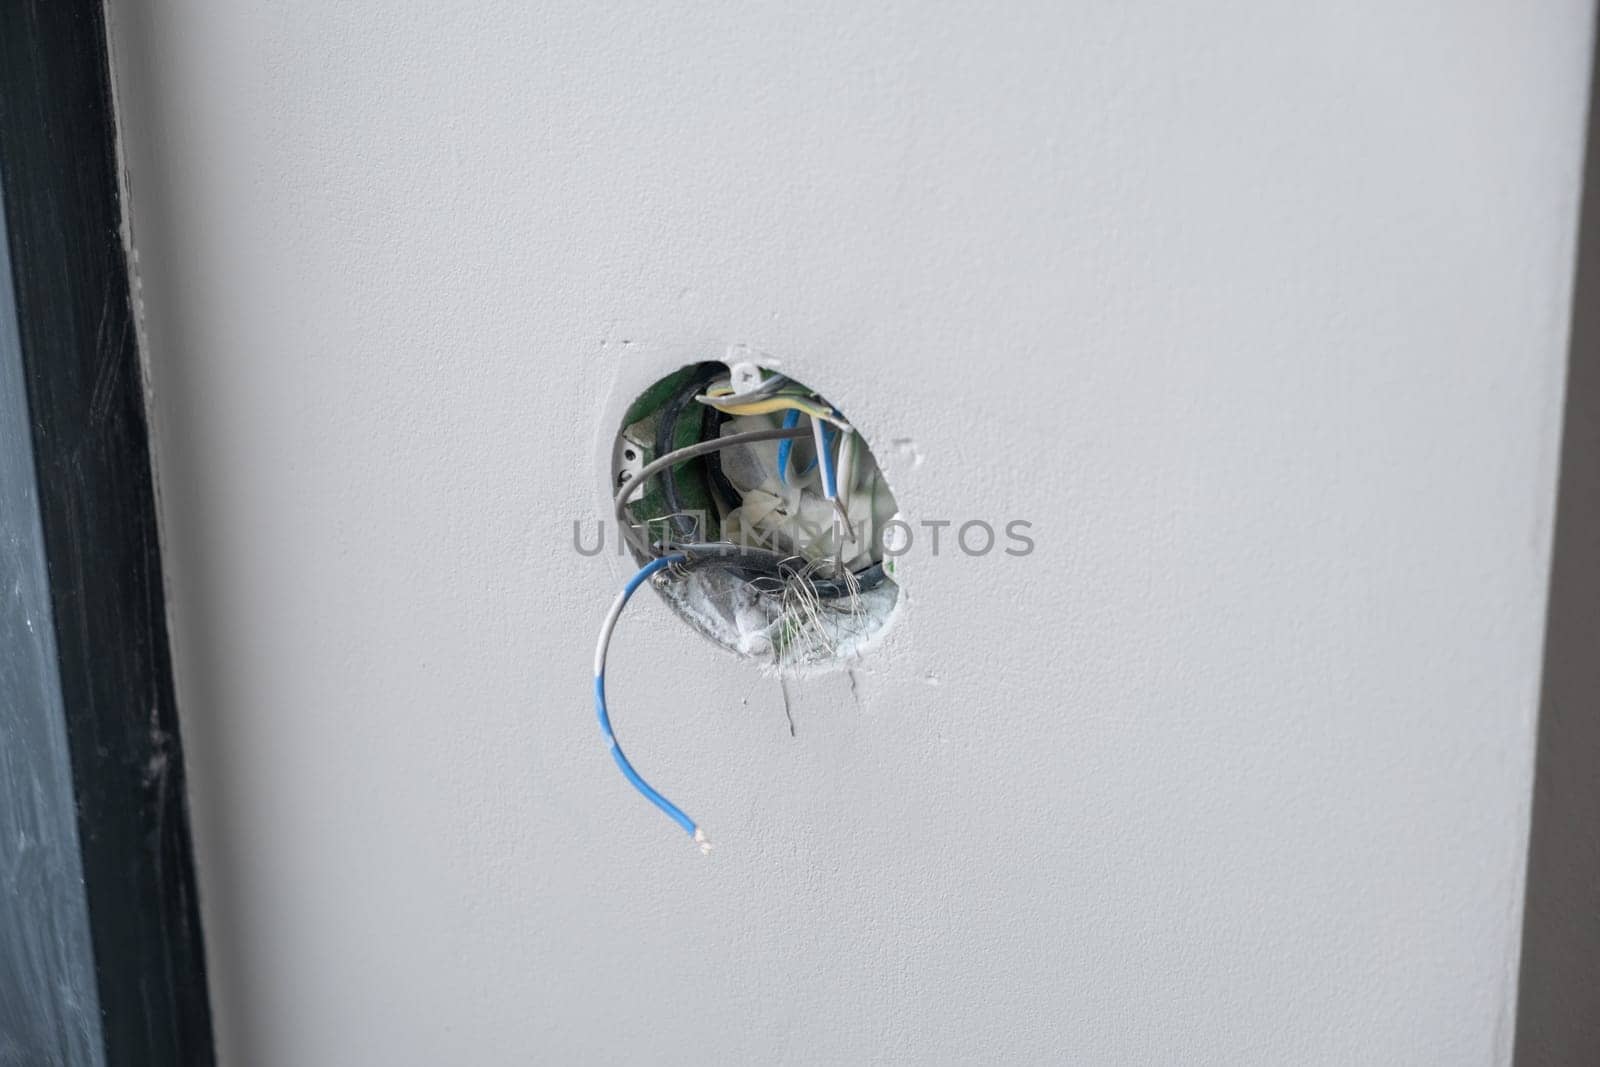 Apartment renovation. Electrical wiring. Wires sticking out of the wall. Wiring electrical cables on wall in the apartment Unfinished electrical mains outlet socket with electrical wires.